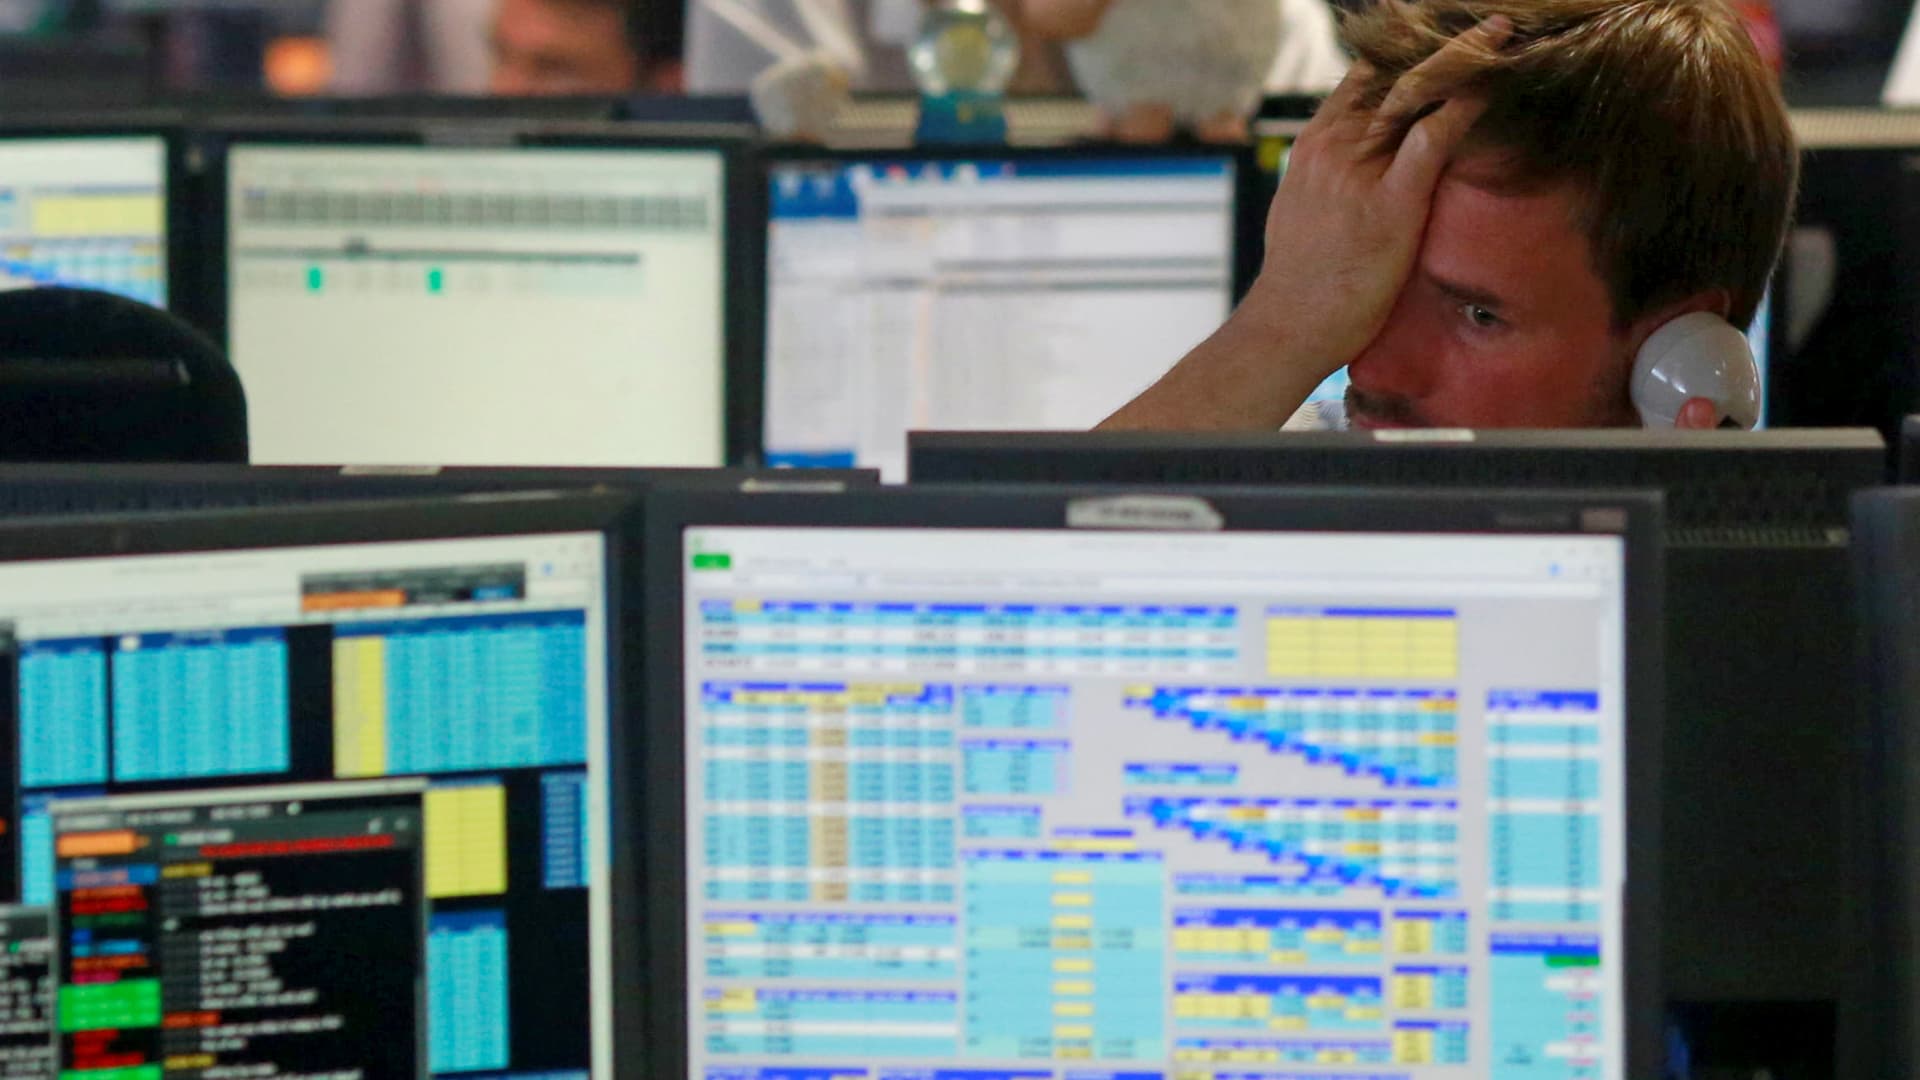 Investor behavior in Europe is mirroring the market's worst crises, new research shows